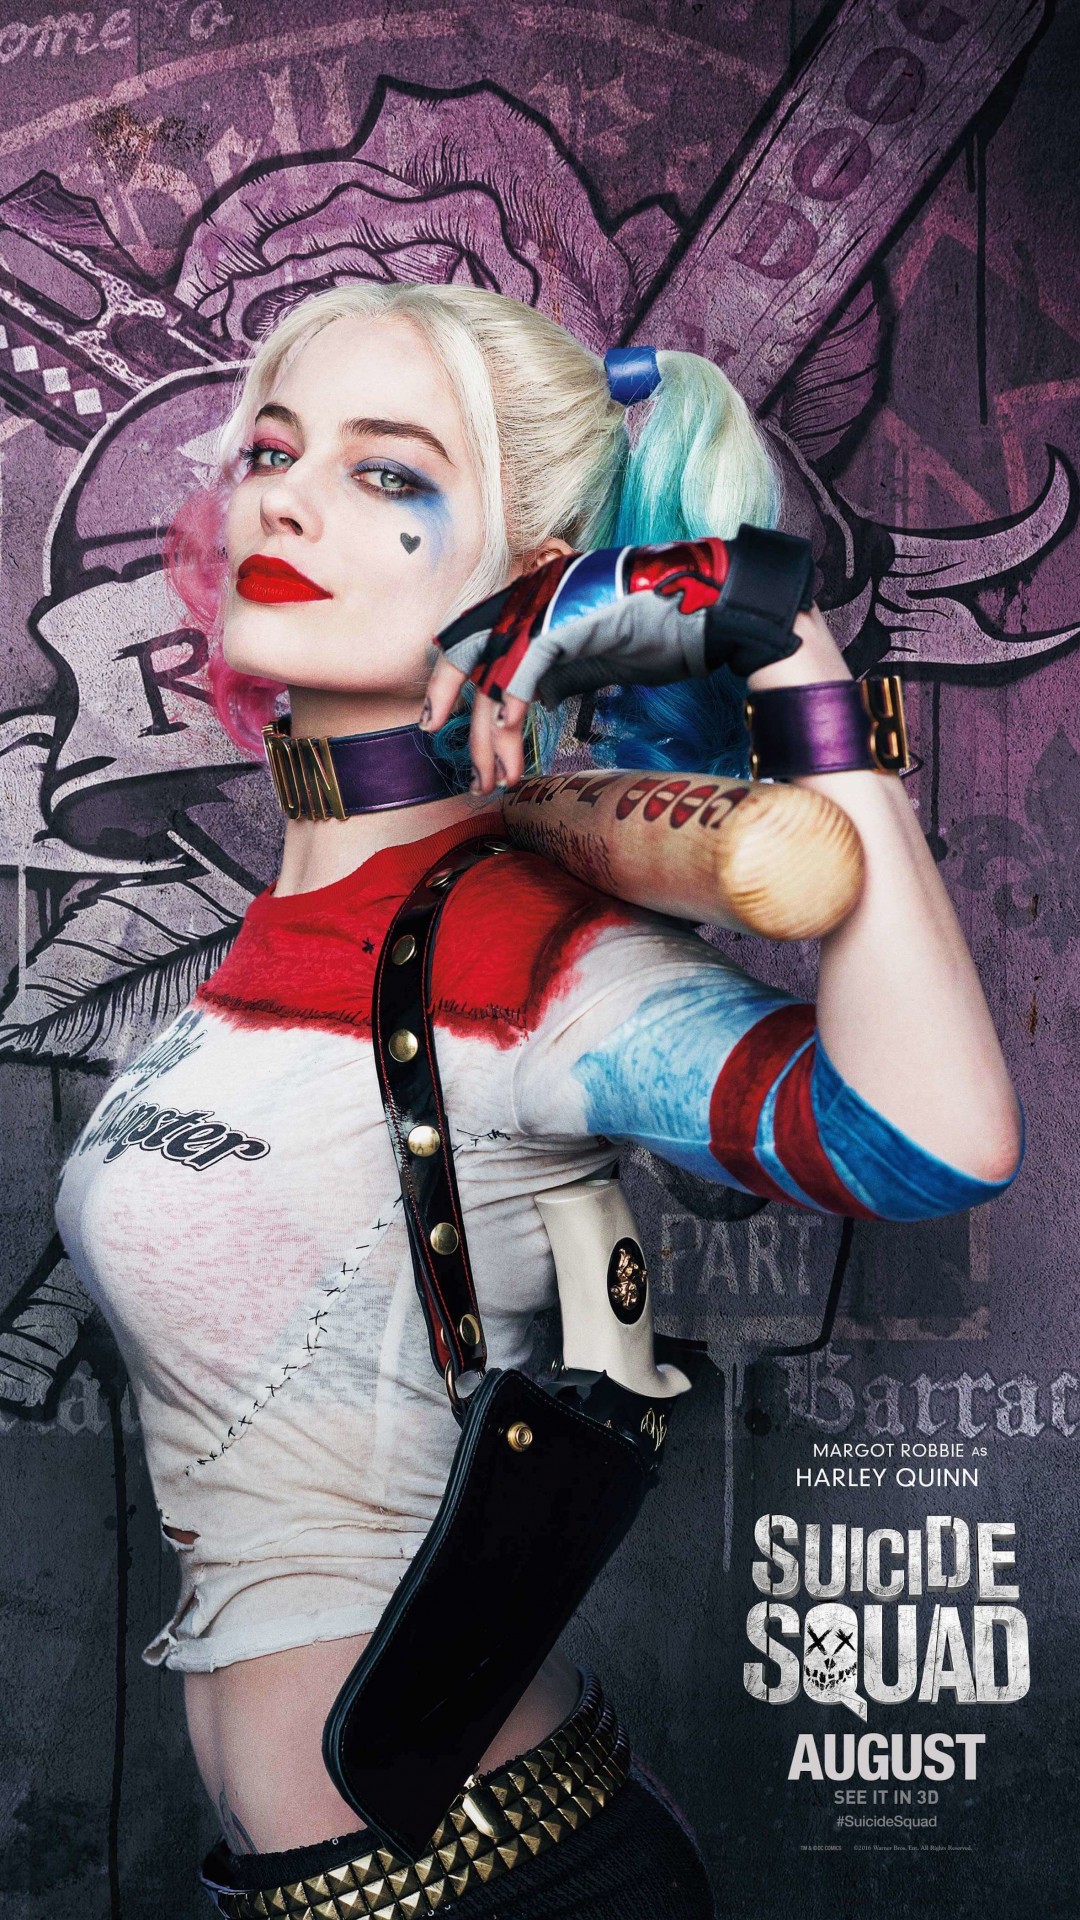 Harley Quinn - Suicide Squad Wallpaper for SAMSUNG Galaxy Note 3